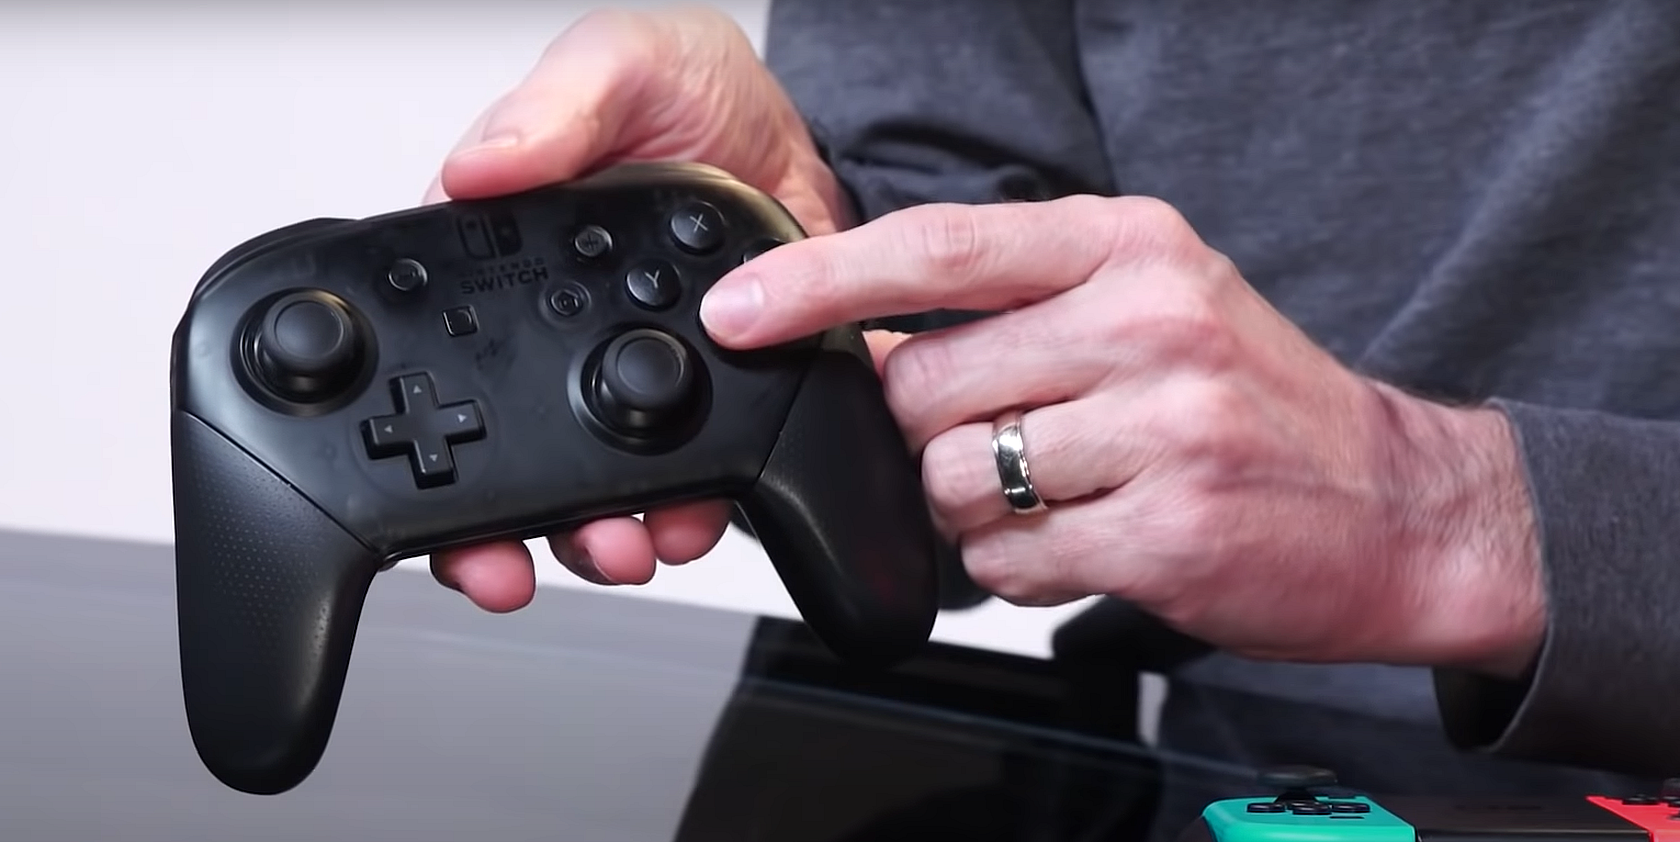 Nintendo Switch Pro Controller in a man's hand